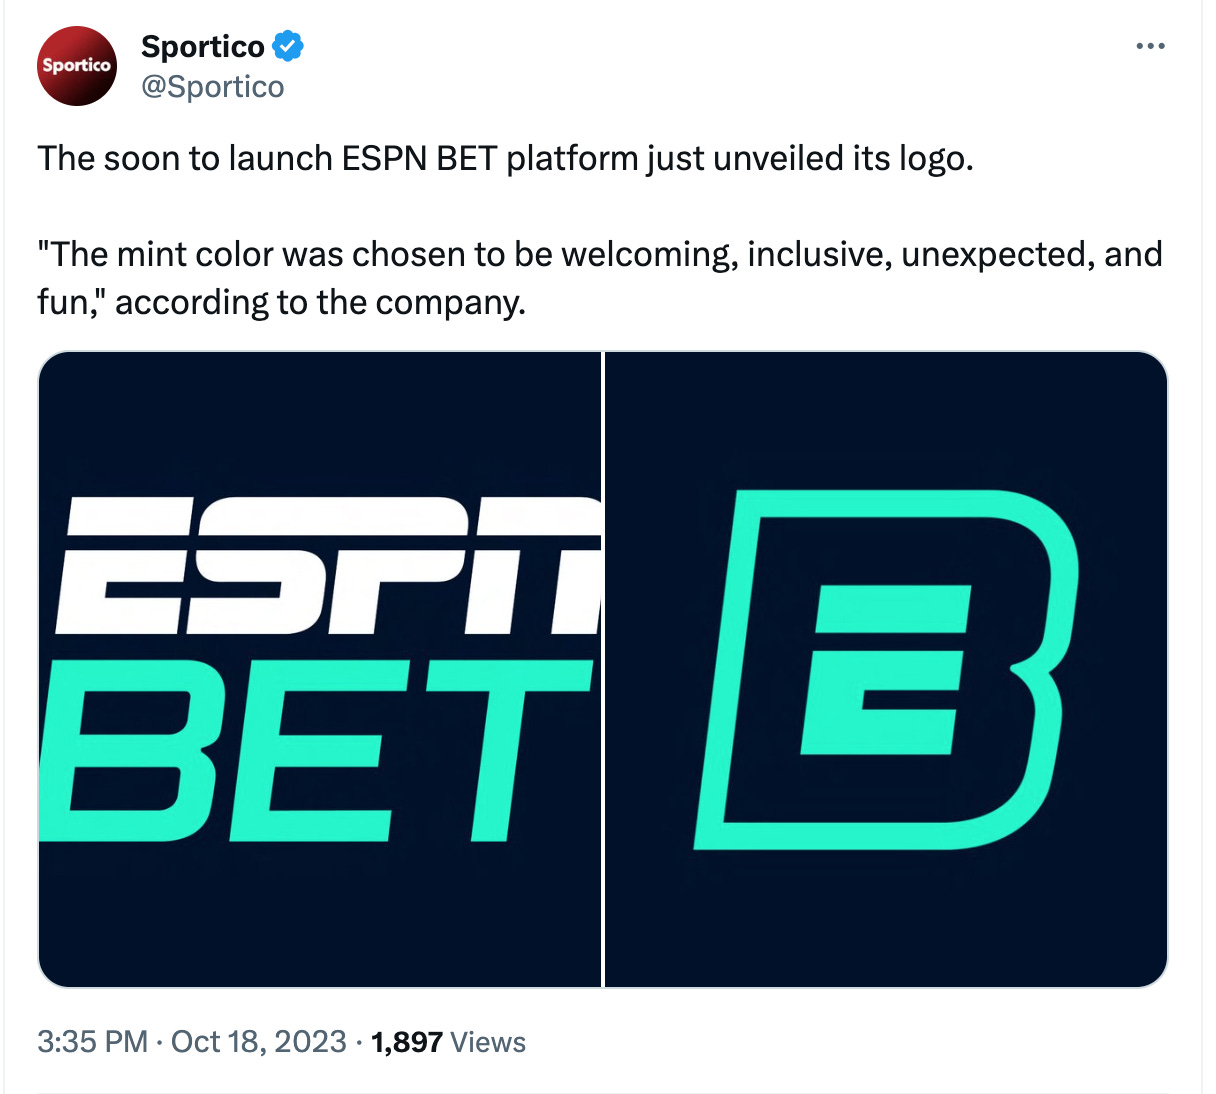 Sportico tweet: "The soon to launch ESPN BET platform just unveiled its logo.  "The mint color was chosen to be welcoming, inclusive, unexpected, and fun," according to the company." with a photo of ESPN BET logos showing green colors